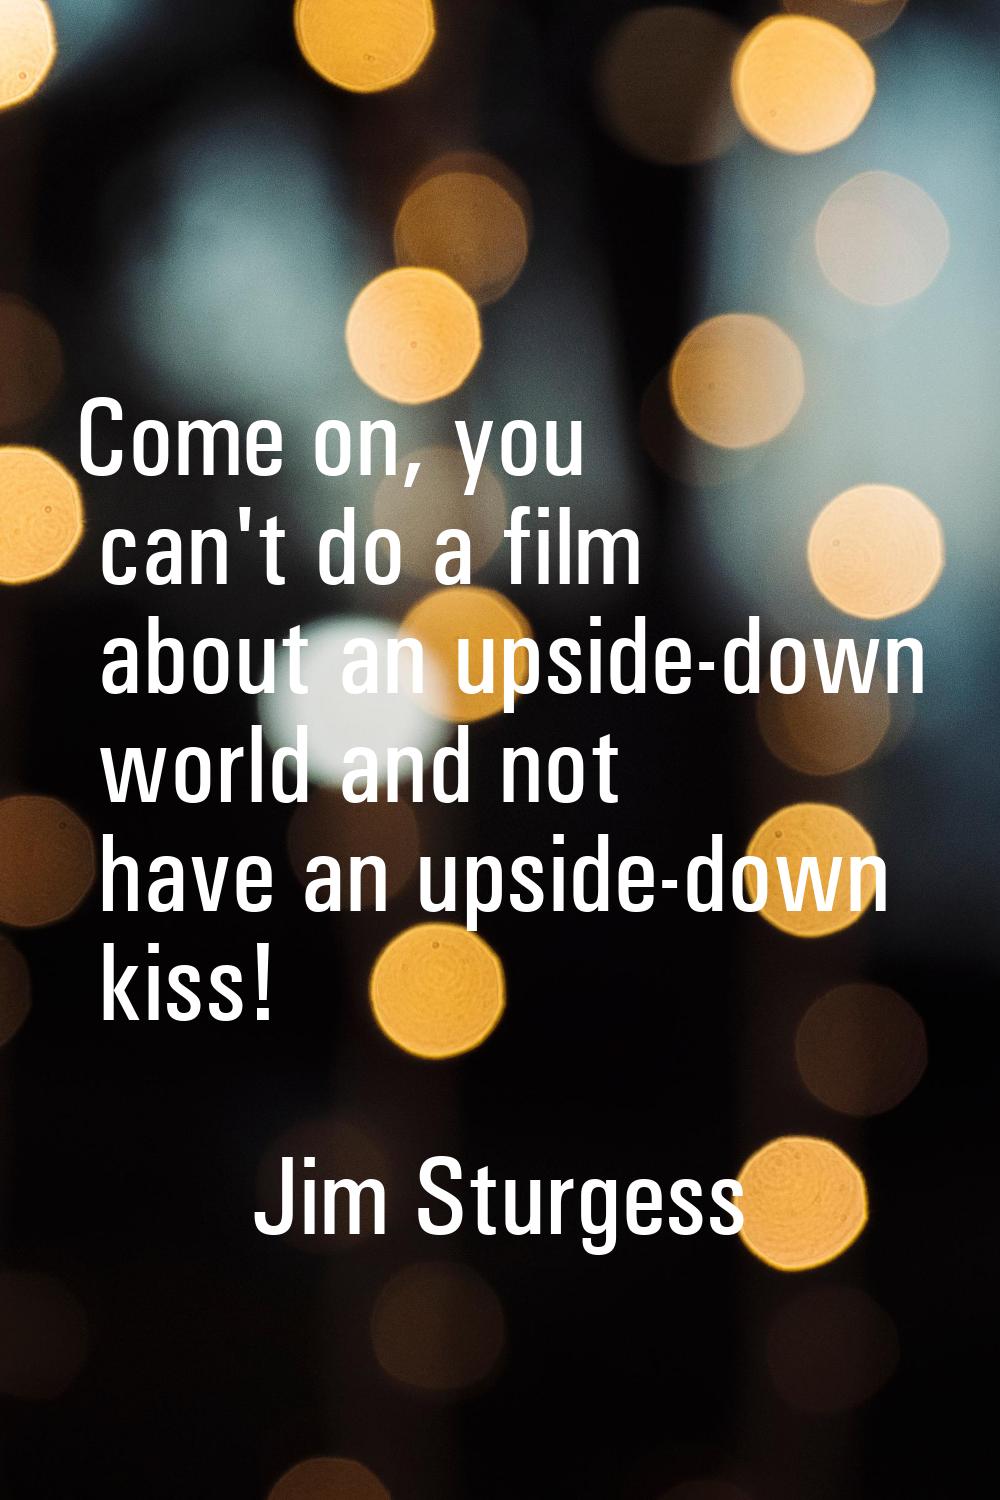 Come on, you can't do a film about an upside-down world and not have an upside-down kiss!